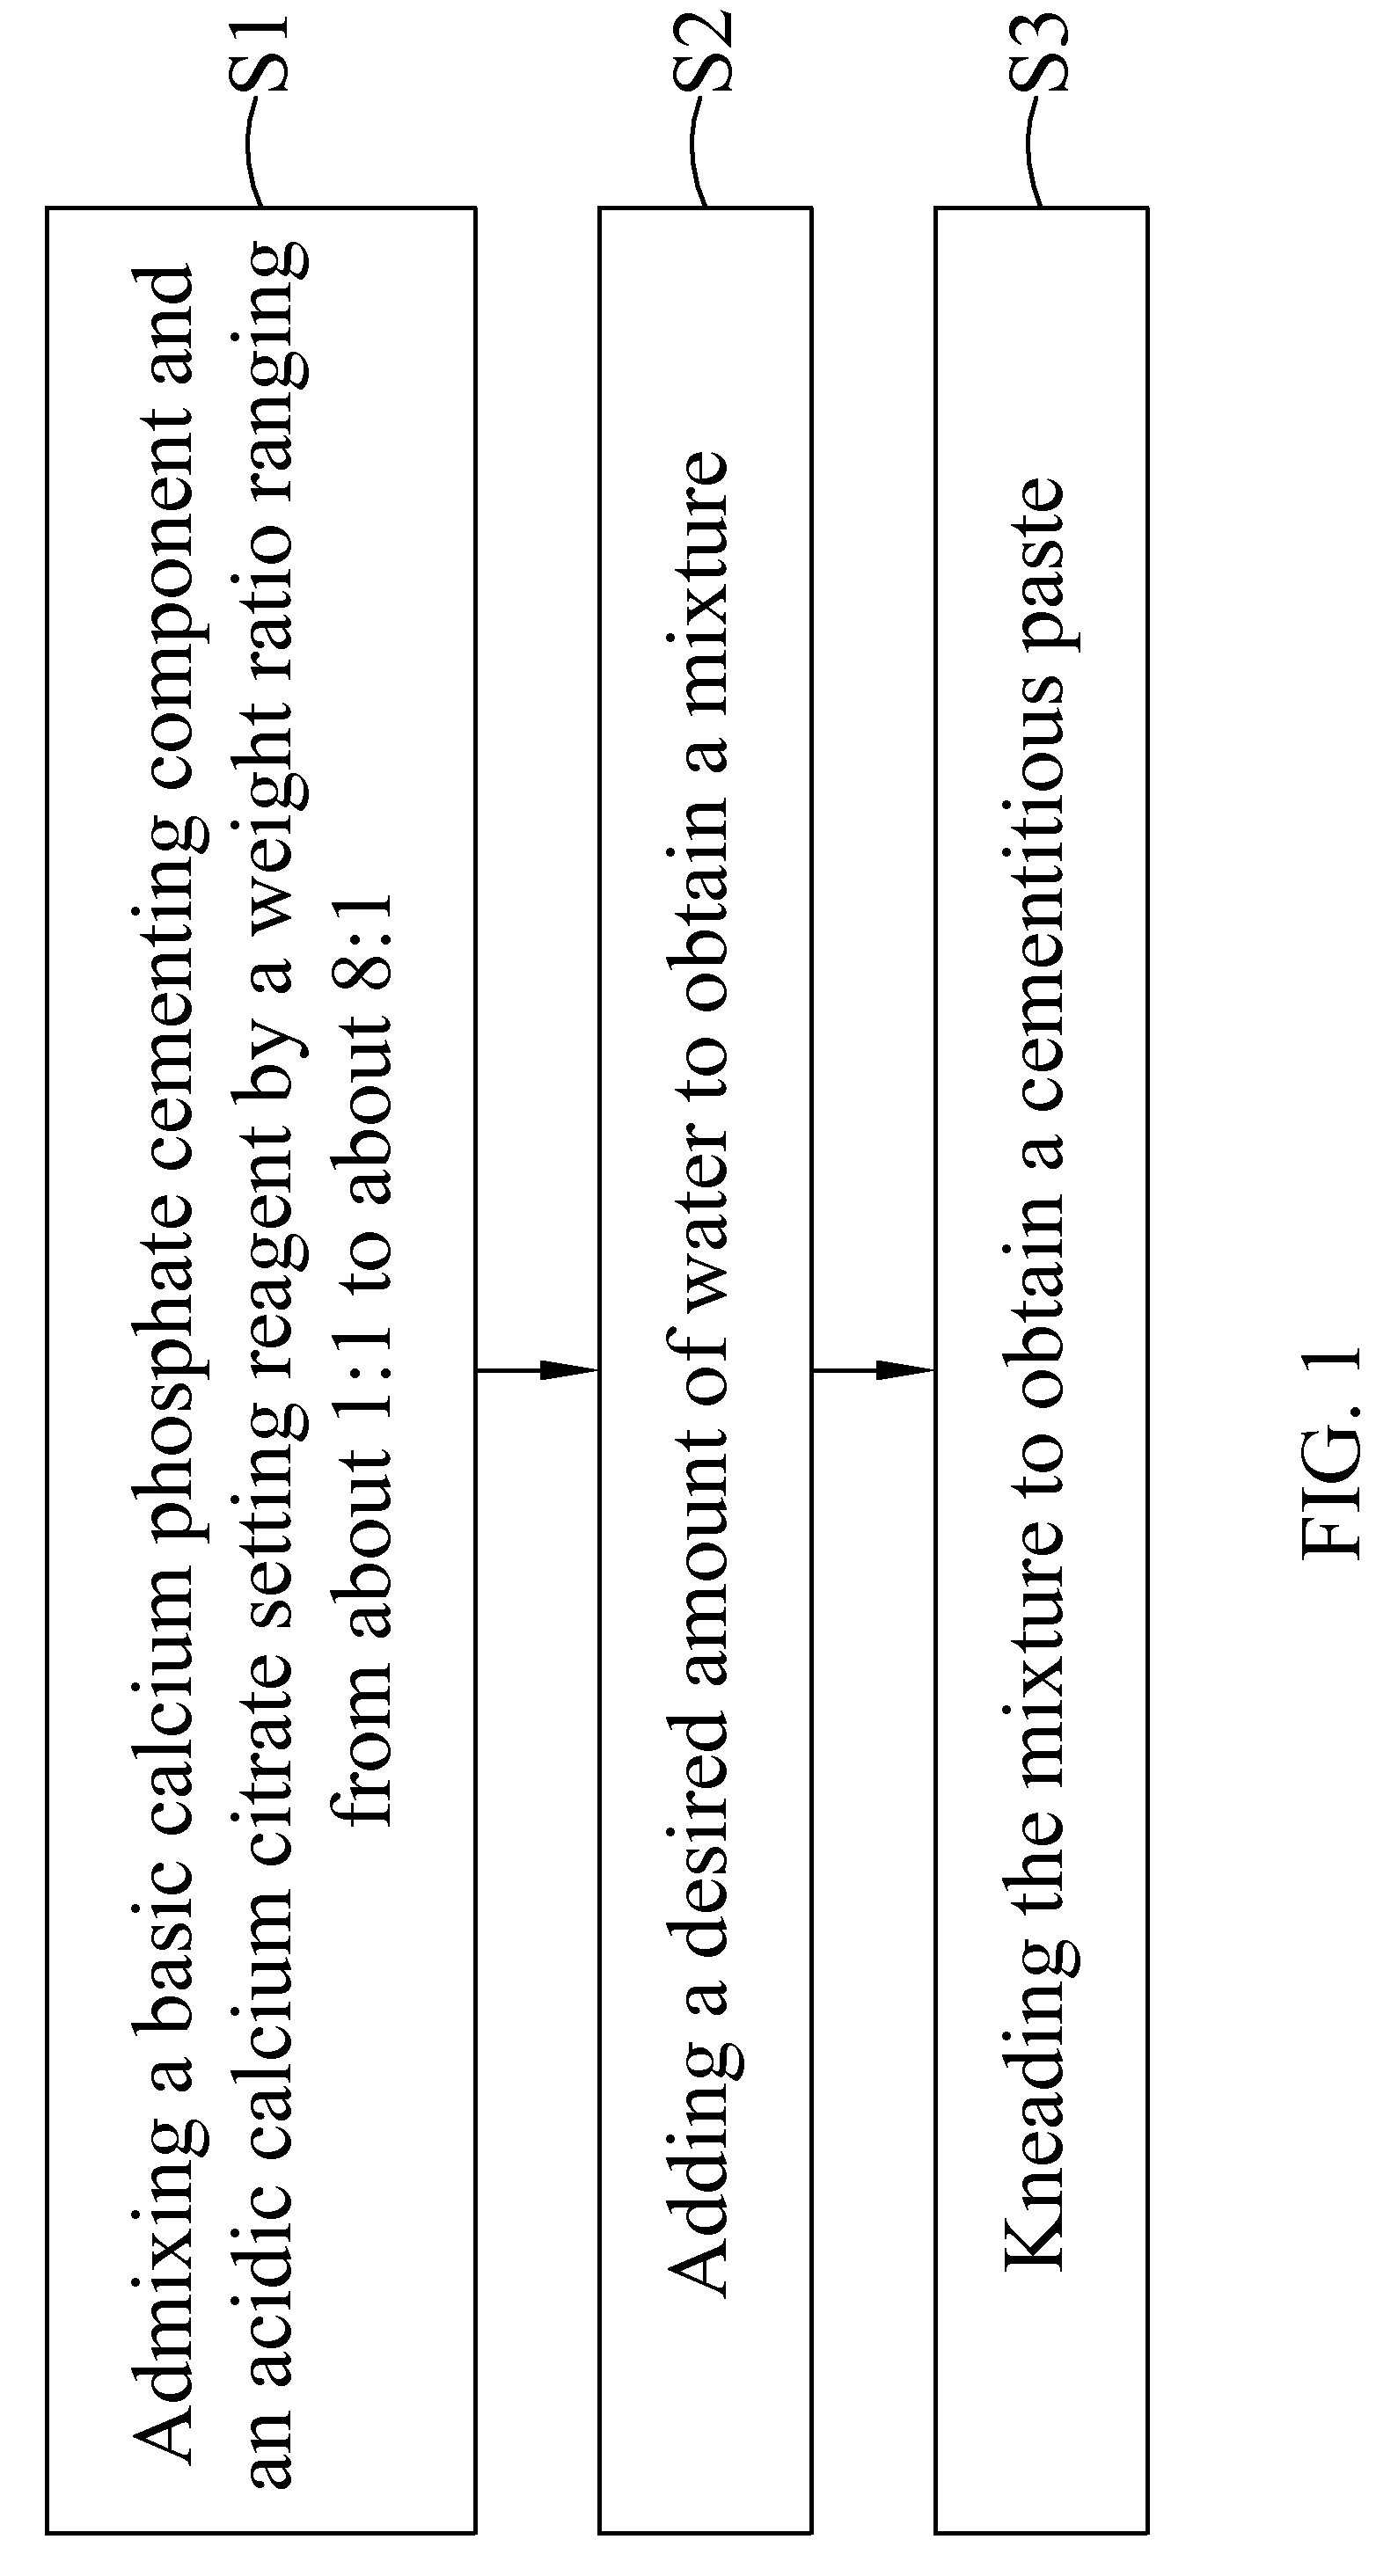 Surgical calcium phosphate citrate-containing cement and method of manufacturing the same